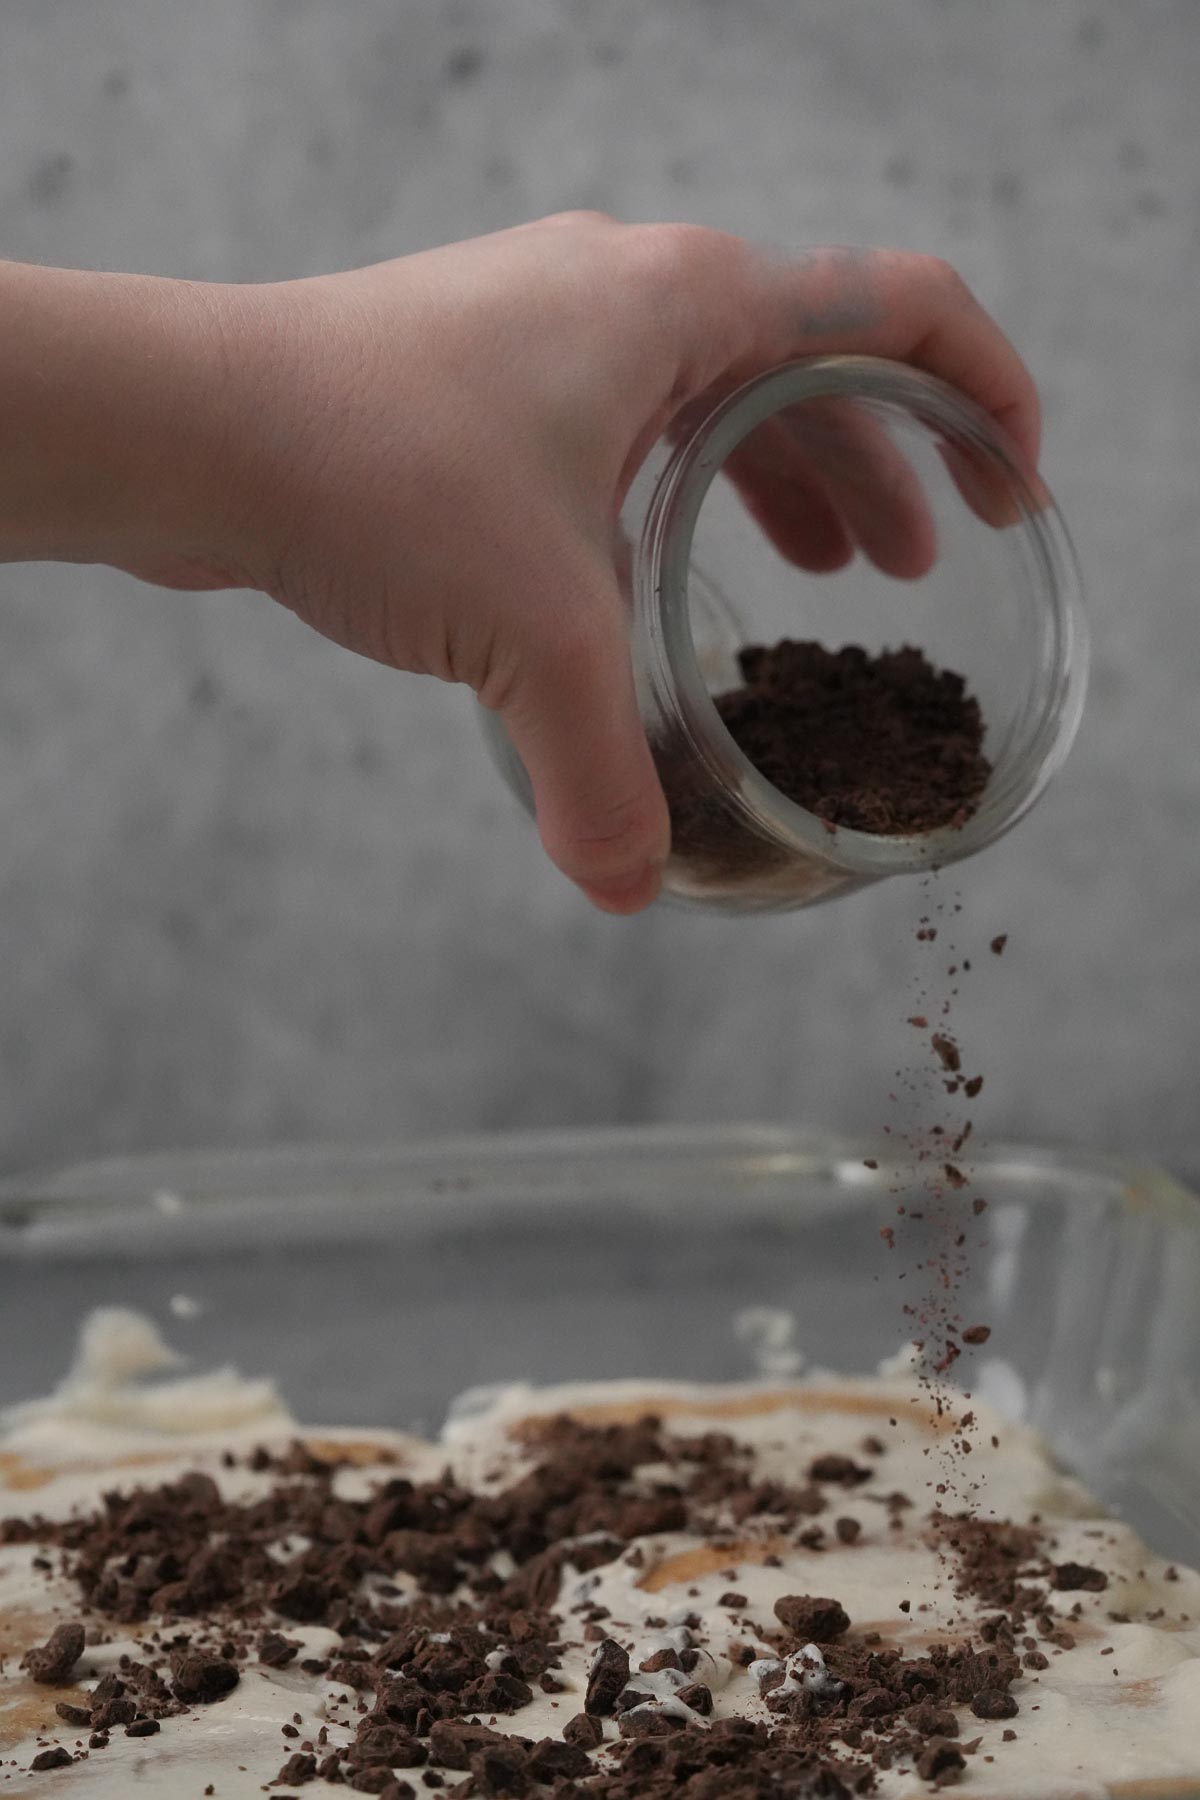 A hand is sprinkling chopped chocolate on a baking dish filled with vegan tiramisu.